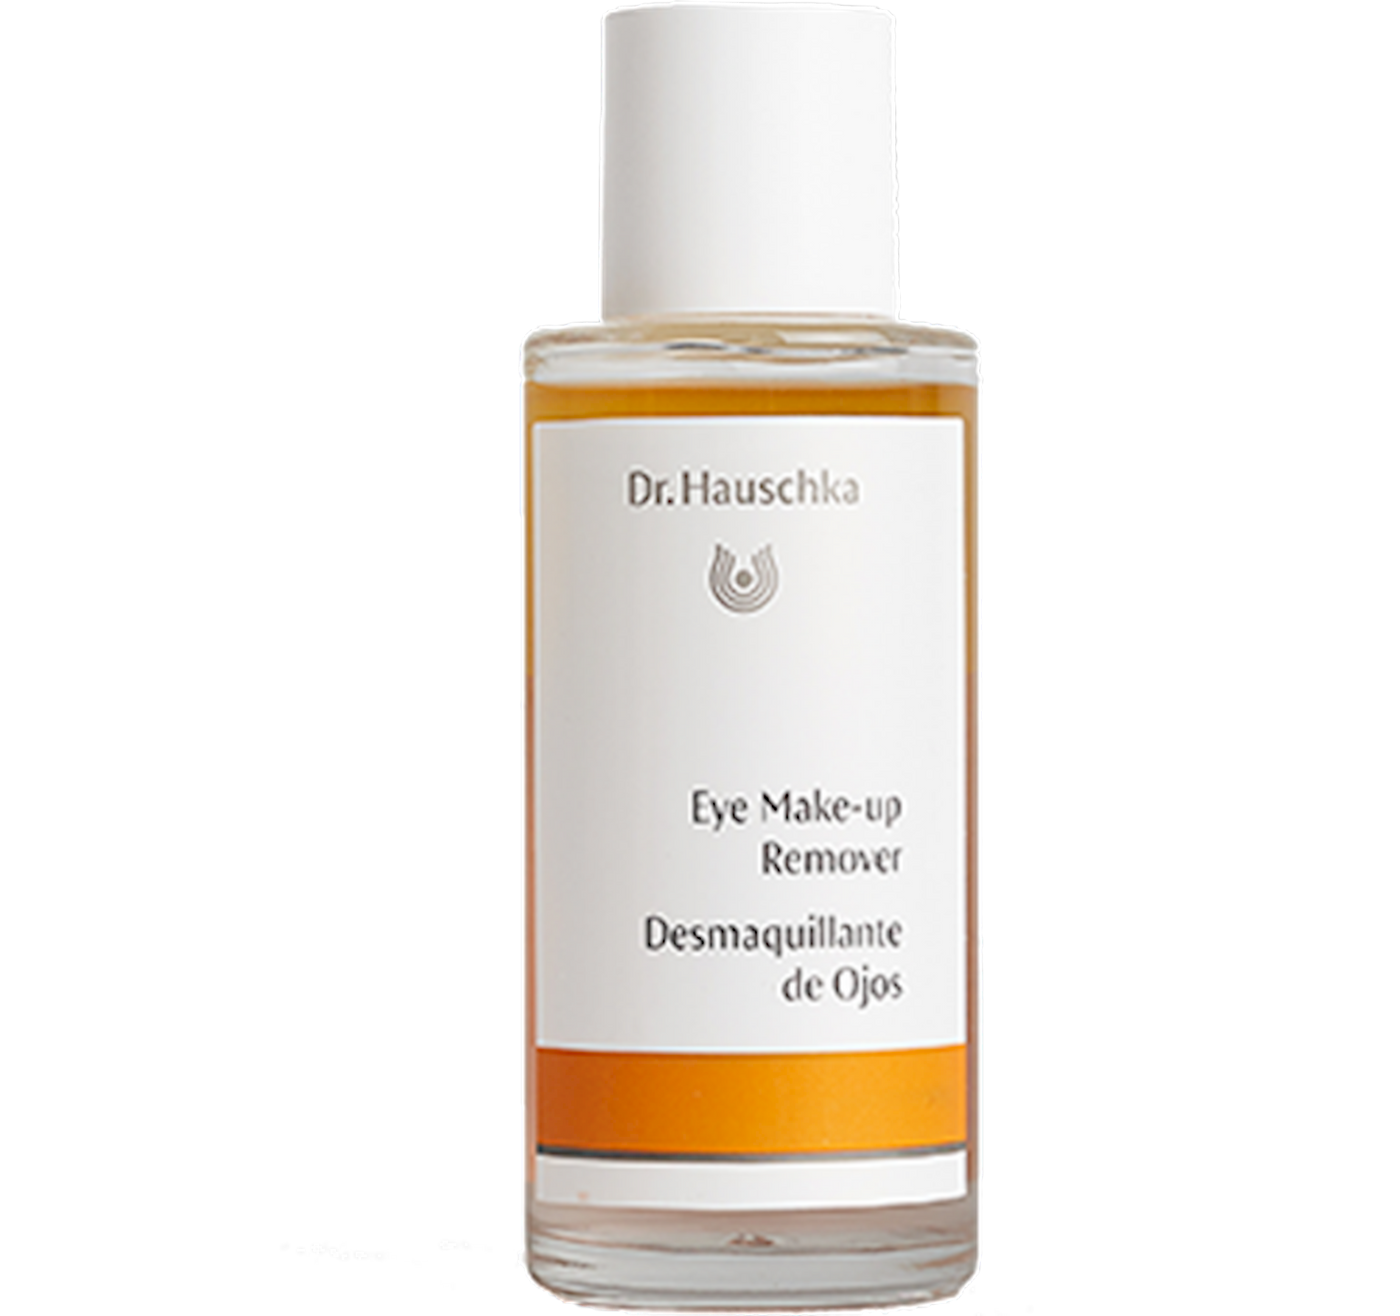 Eye Make-up Remover 2.5 fl oz Curated Wellness